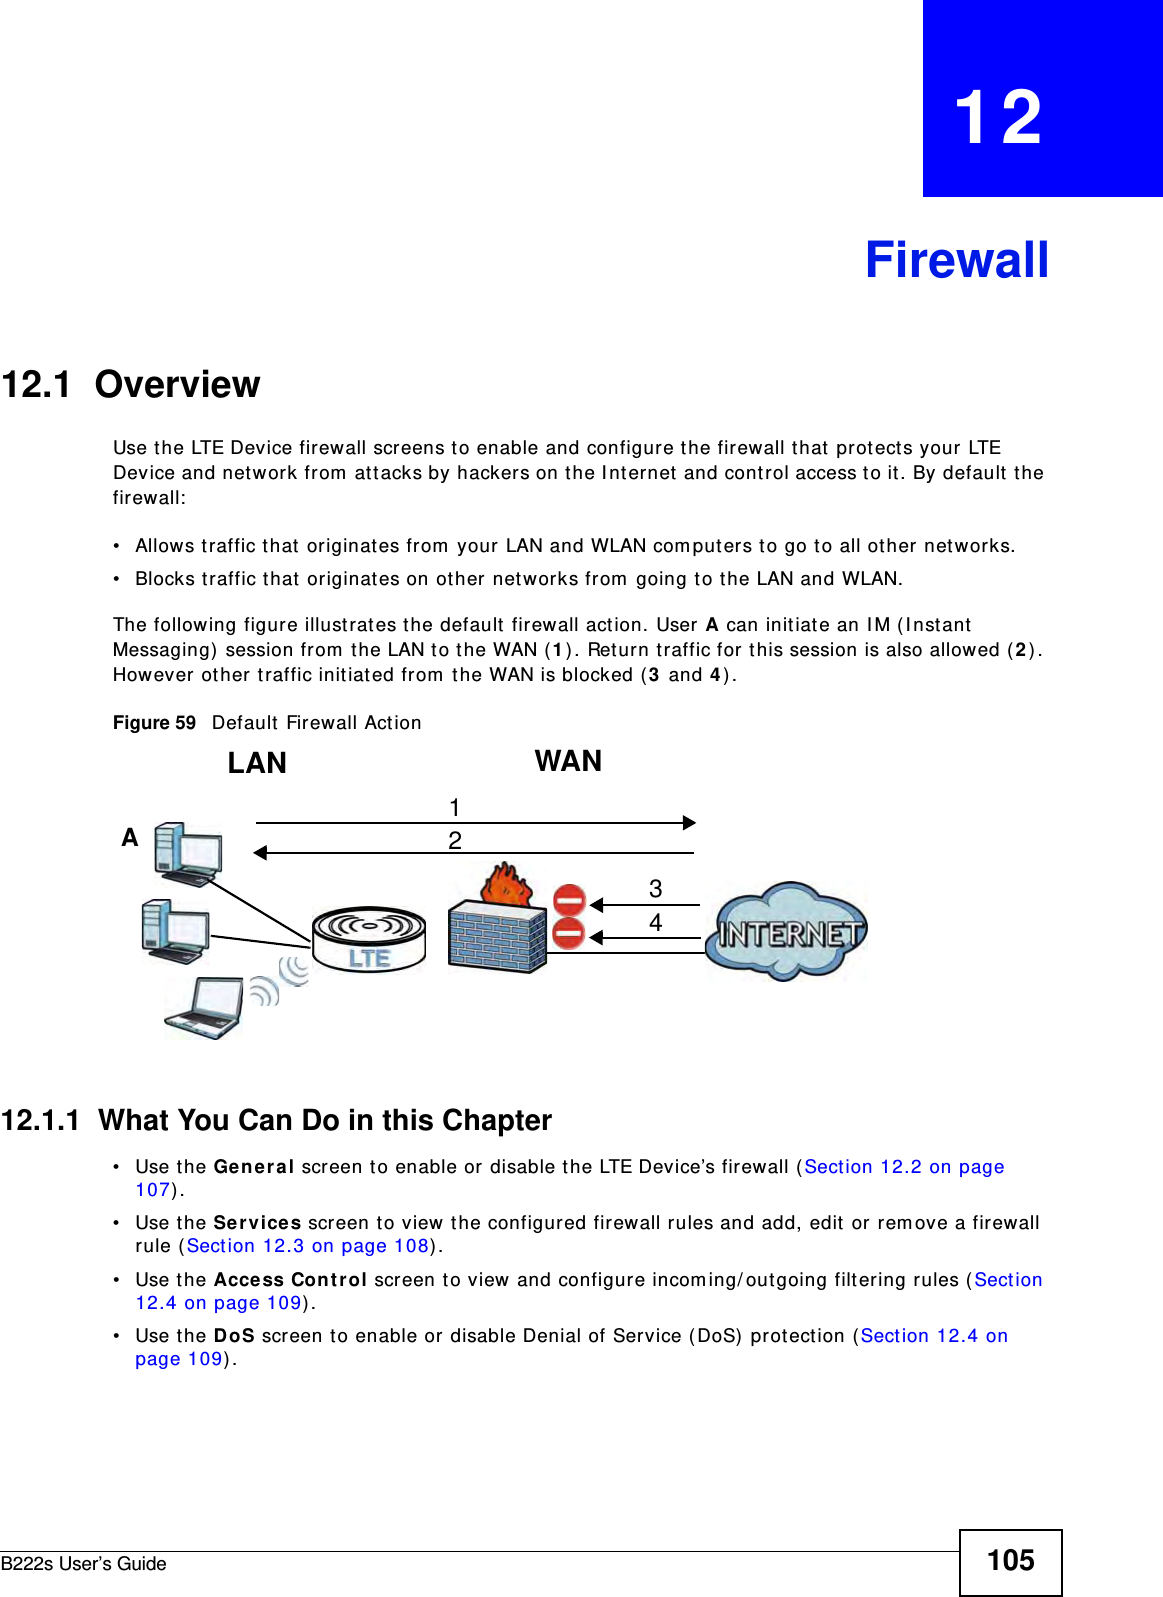 B222s User’s Guide 105CHAPTER   12Firewall12.1  OverviewUse t he LTE Device firewall screens to enable and configure the firewall that  protect s your LTE Device and network fr om  at t acks by hacker s on t he I nt ernet and cont rol access t o it. By default the firewall:• Allows traffic t hat  originat es from  your LAN and WLAN com put ers t o go t o all ot her networks. • Blocks t raffic t hat  originat es on ot her networks from  going t o the LAN and WLAN. The following figure illust rat es t he default  fir ewall act ion. User A can initiat e an I M ( I nst ant  Messaging) session from  the LAN to t he WAN (1) . Ret urn traffic for  t his session is also allowed ( 2) . However other t raffic init iated from  t he WAN is blocked ( 3 and 4) .Figure 59   Default  Firewall Act ion12.1.1  What You Can Do in this Chapter• Use the Genera l screen t o enable or disable t he LTE Device’s firewall (Sect ion 12.2 on page 107) .• Use the Ser vices screen to view  t he configur ed firewall rules and add, edit or rem ove a firewall rule ( Sect ion 12.3 on page 108) .• Use the Access Cont rol screen t o view and configure incom ing/ out going filt ering rules ( Sect ion 12.4 on page 109) . • Use the DoS screen to enable or disable Denial of Service ( DoS)  prot ection ( Sect ion 12.4 on page 109) . WANLAN3412A